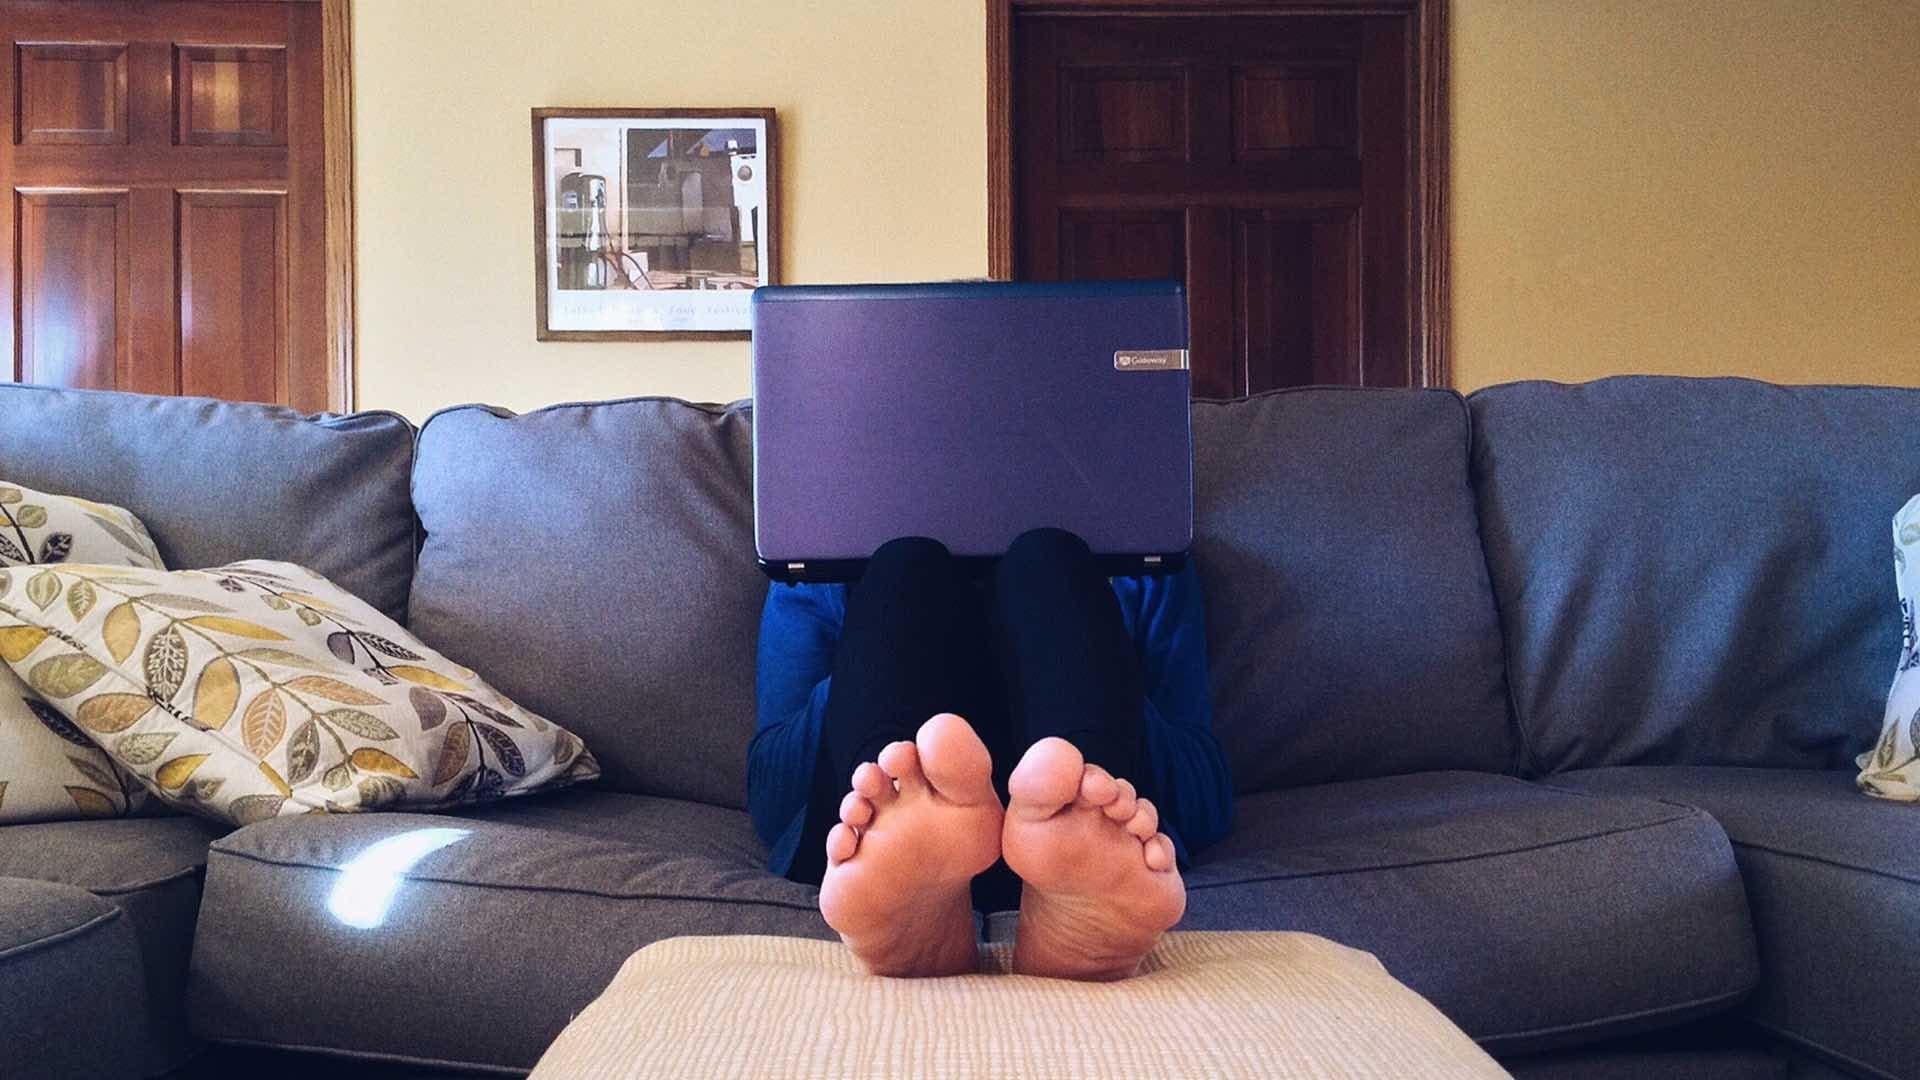 Working from home with feet up.